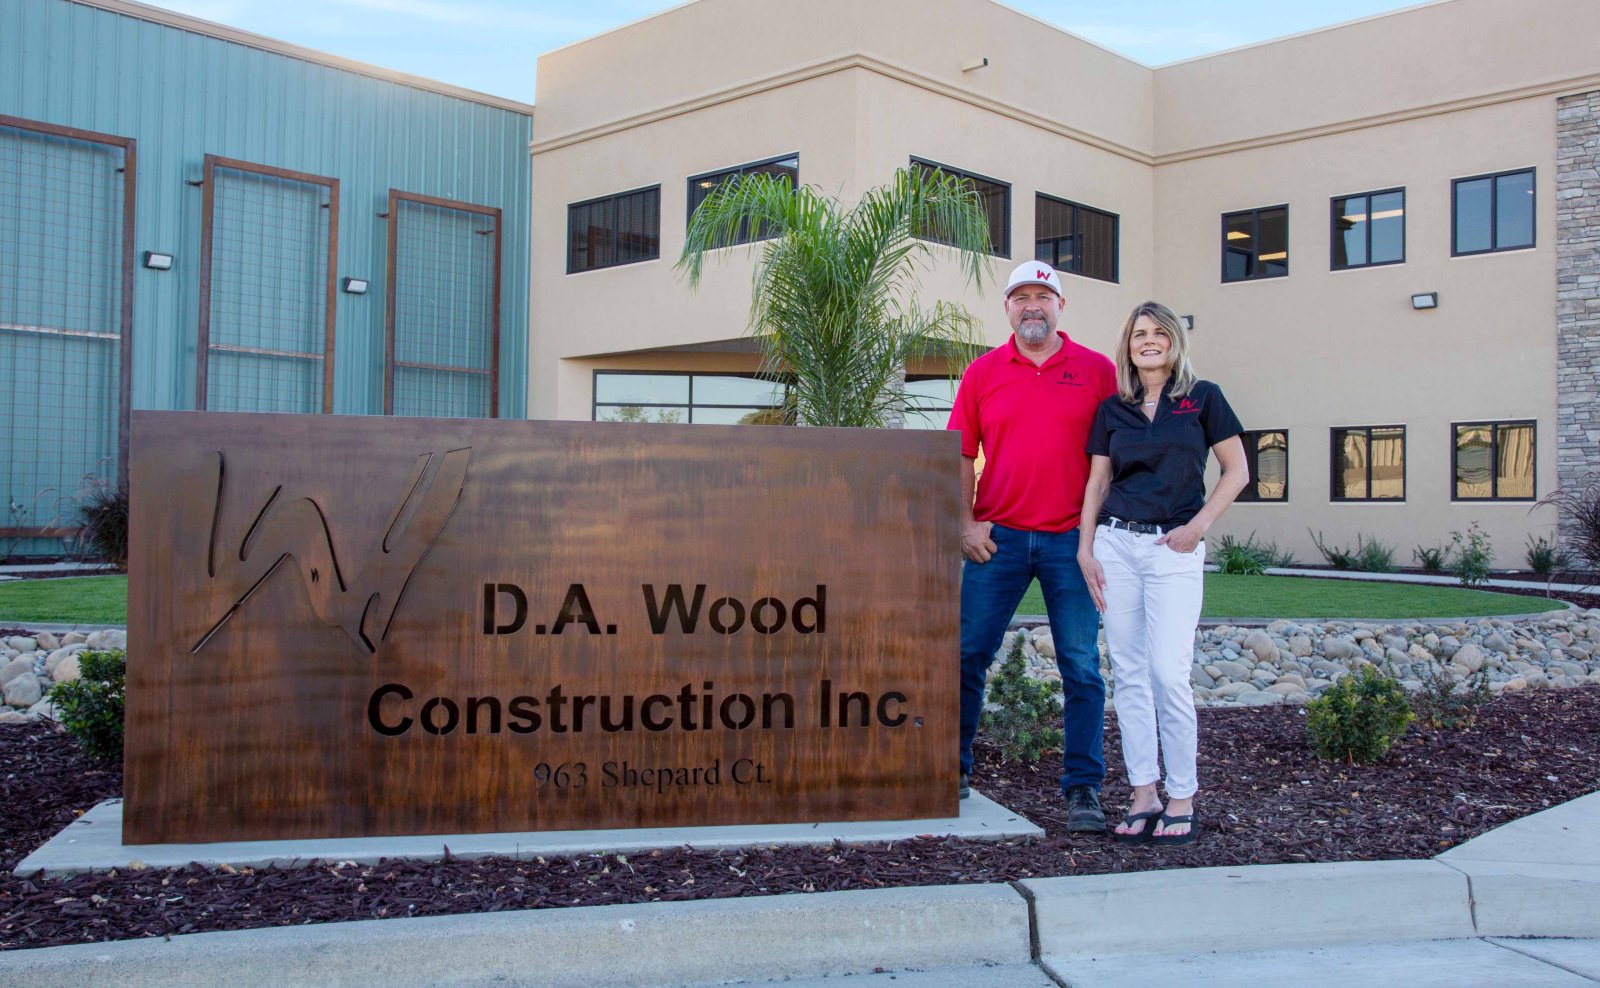 Danny & Kristine Wood, Owners of D.A. Wood Construction